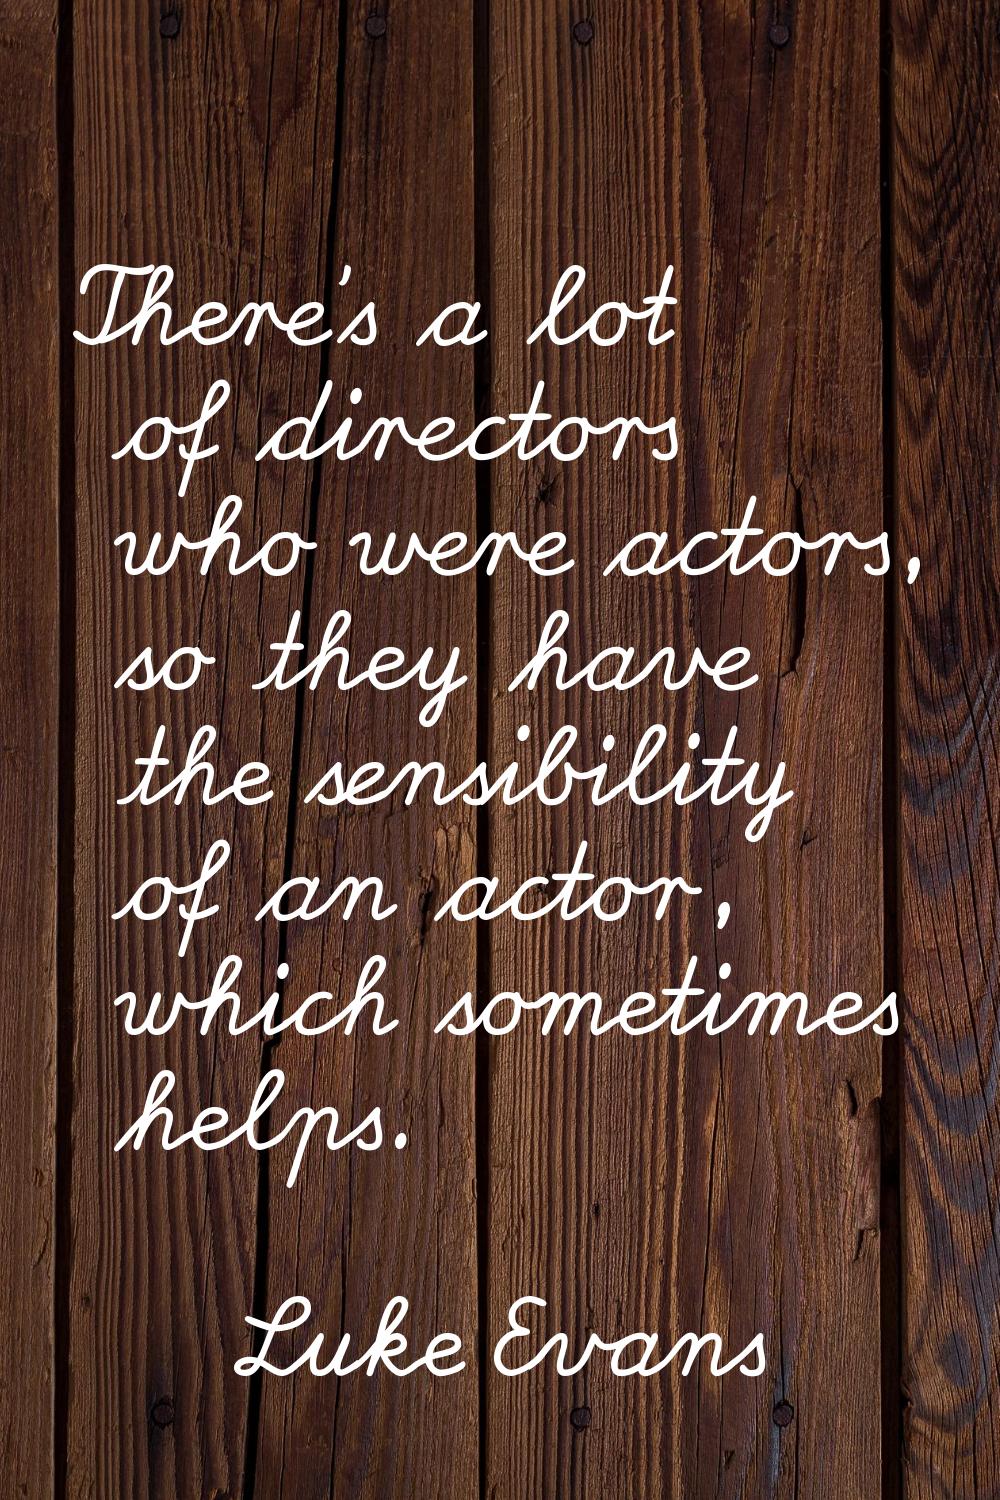 There's a lot of directors who were actors, so they have the sensibility of an actor, which sometim